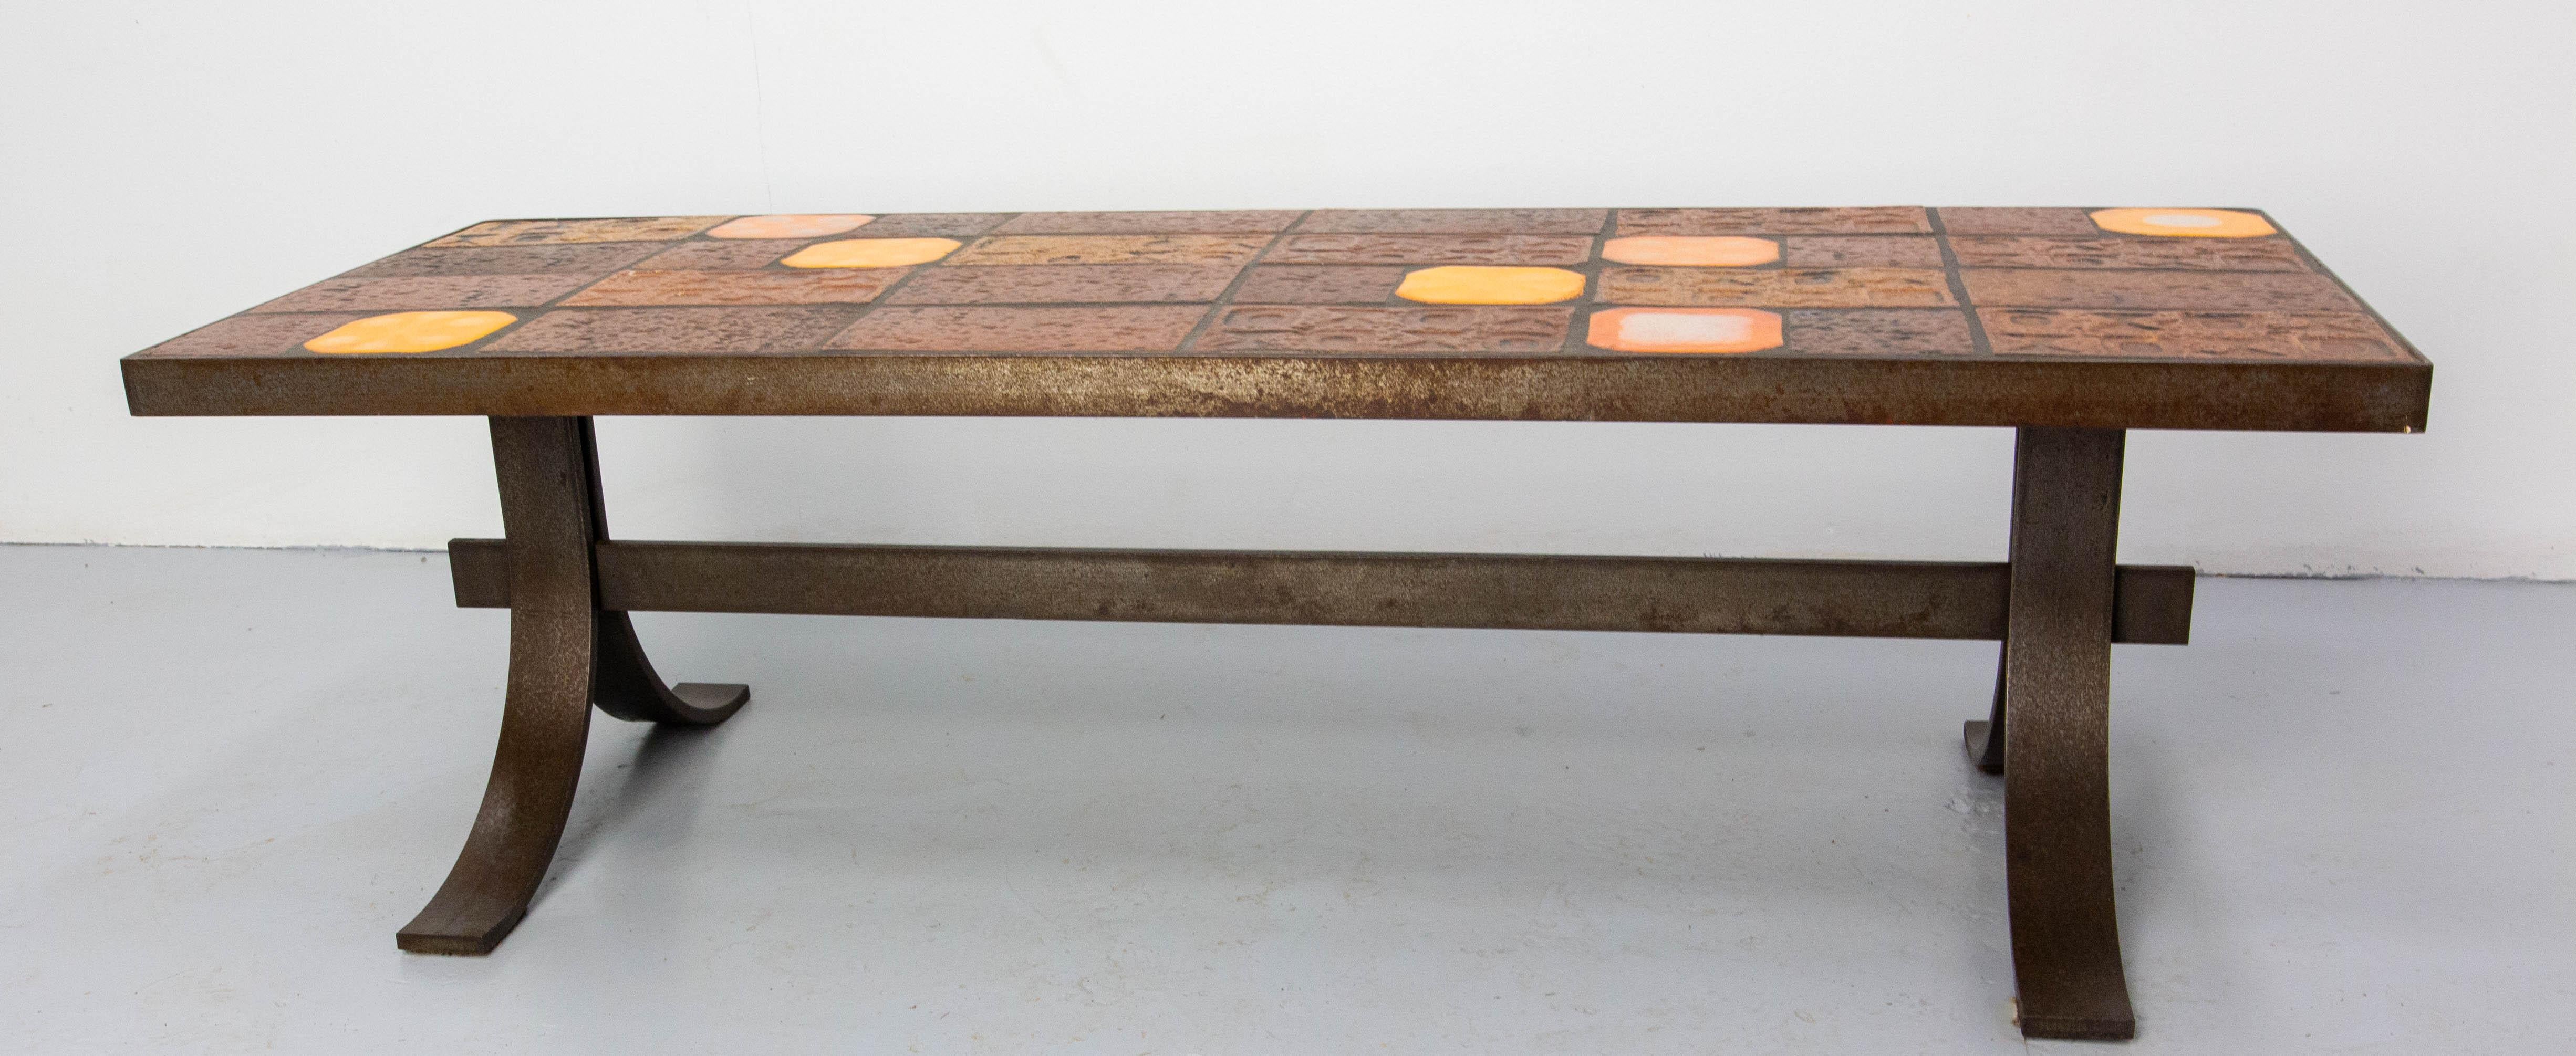 Coffee table with glazed faience and terracotta tiles top in the style of Roger Capron.
The contrast between the glossy, shiny appearance of the tiles and the sobriety of the terracotta tiles gives this table its personality.
French,